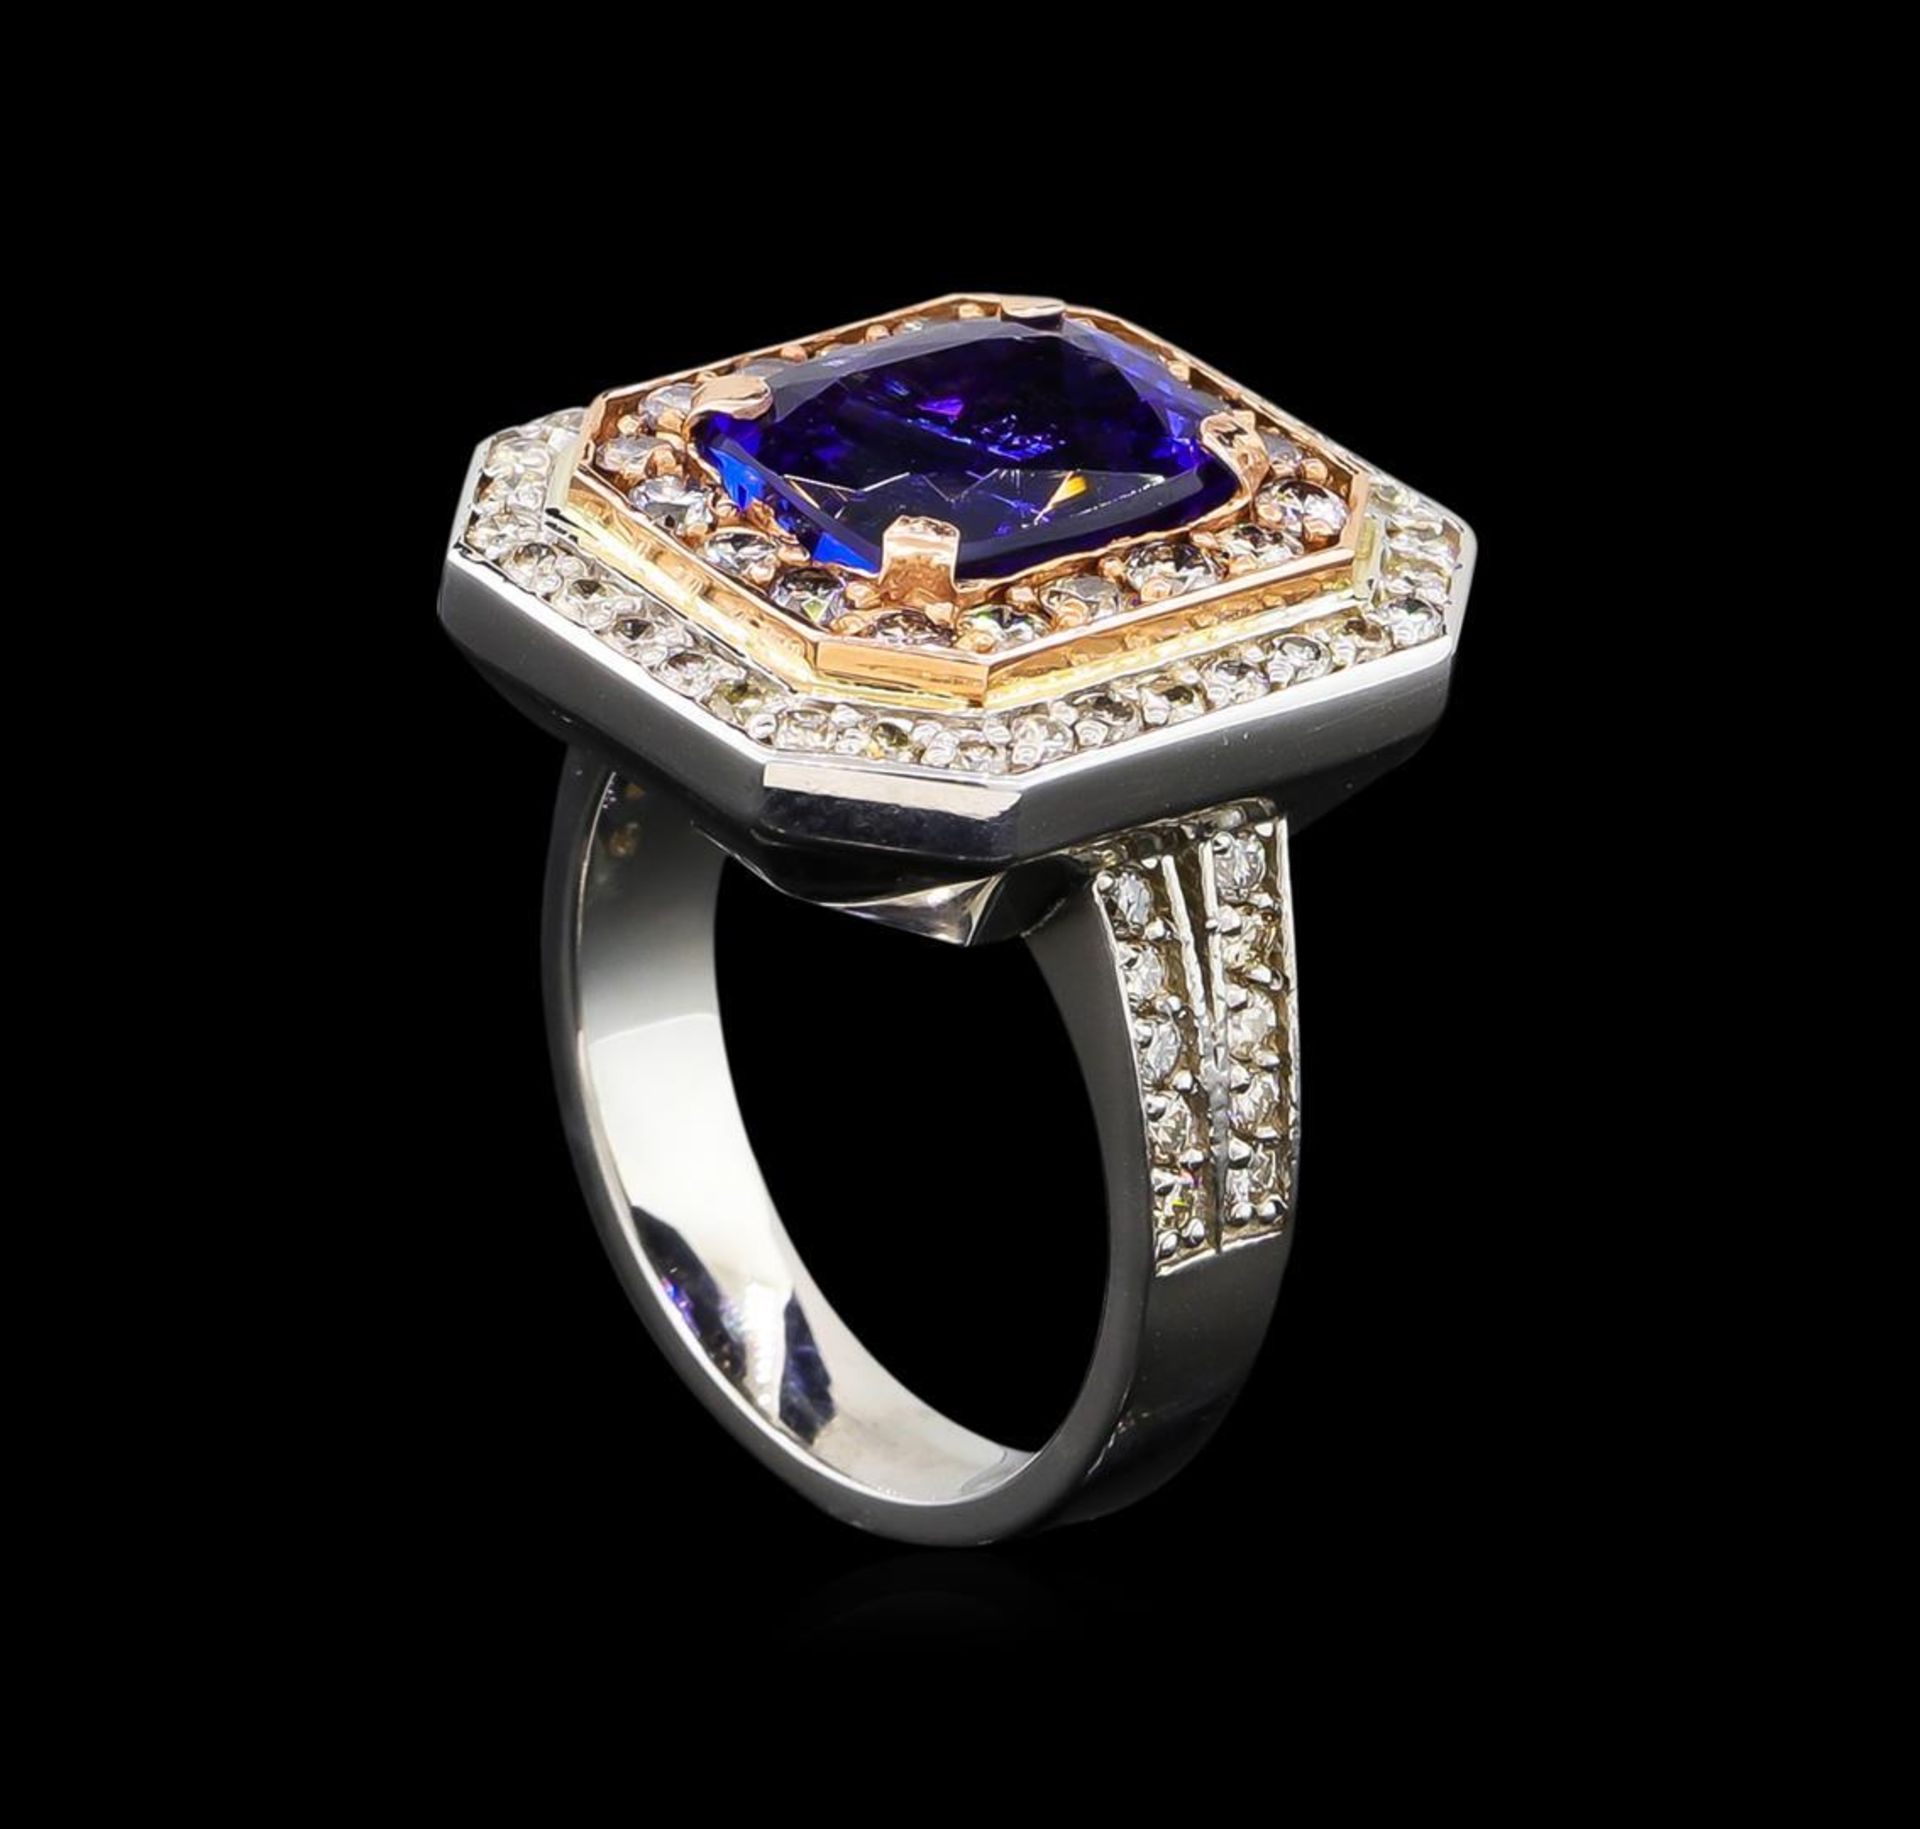 14KT Rose and White Gold 4.29 ctw Tanzanite and Diamond Ring - Image 4 of 5